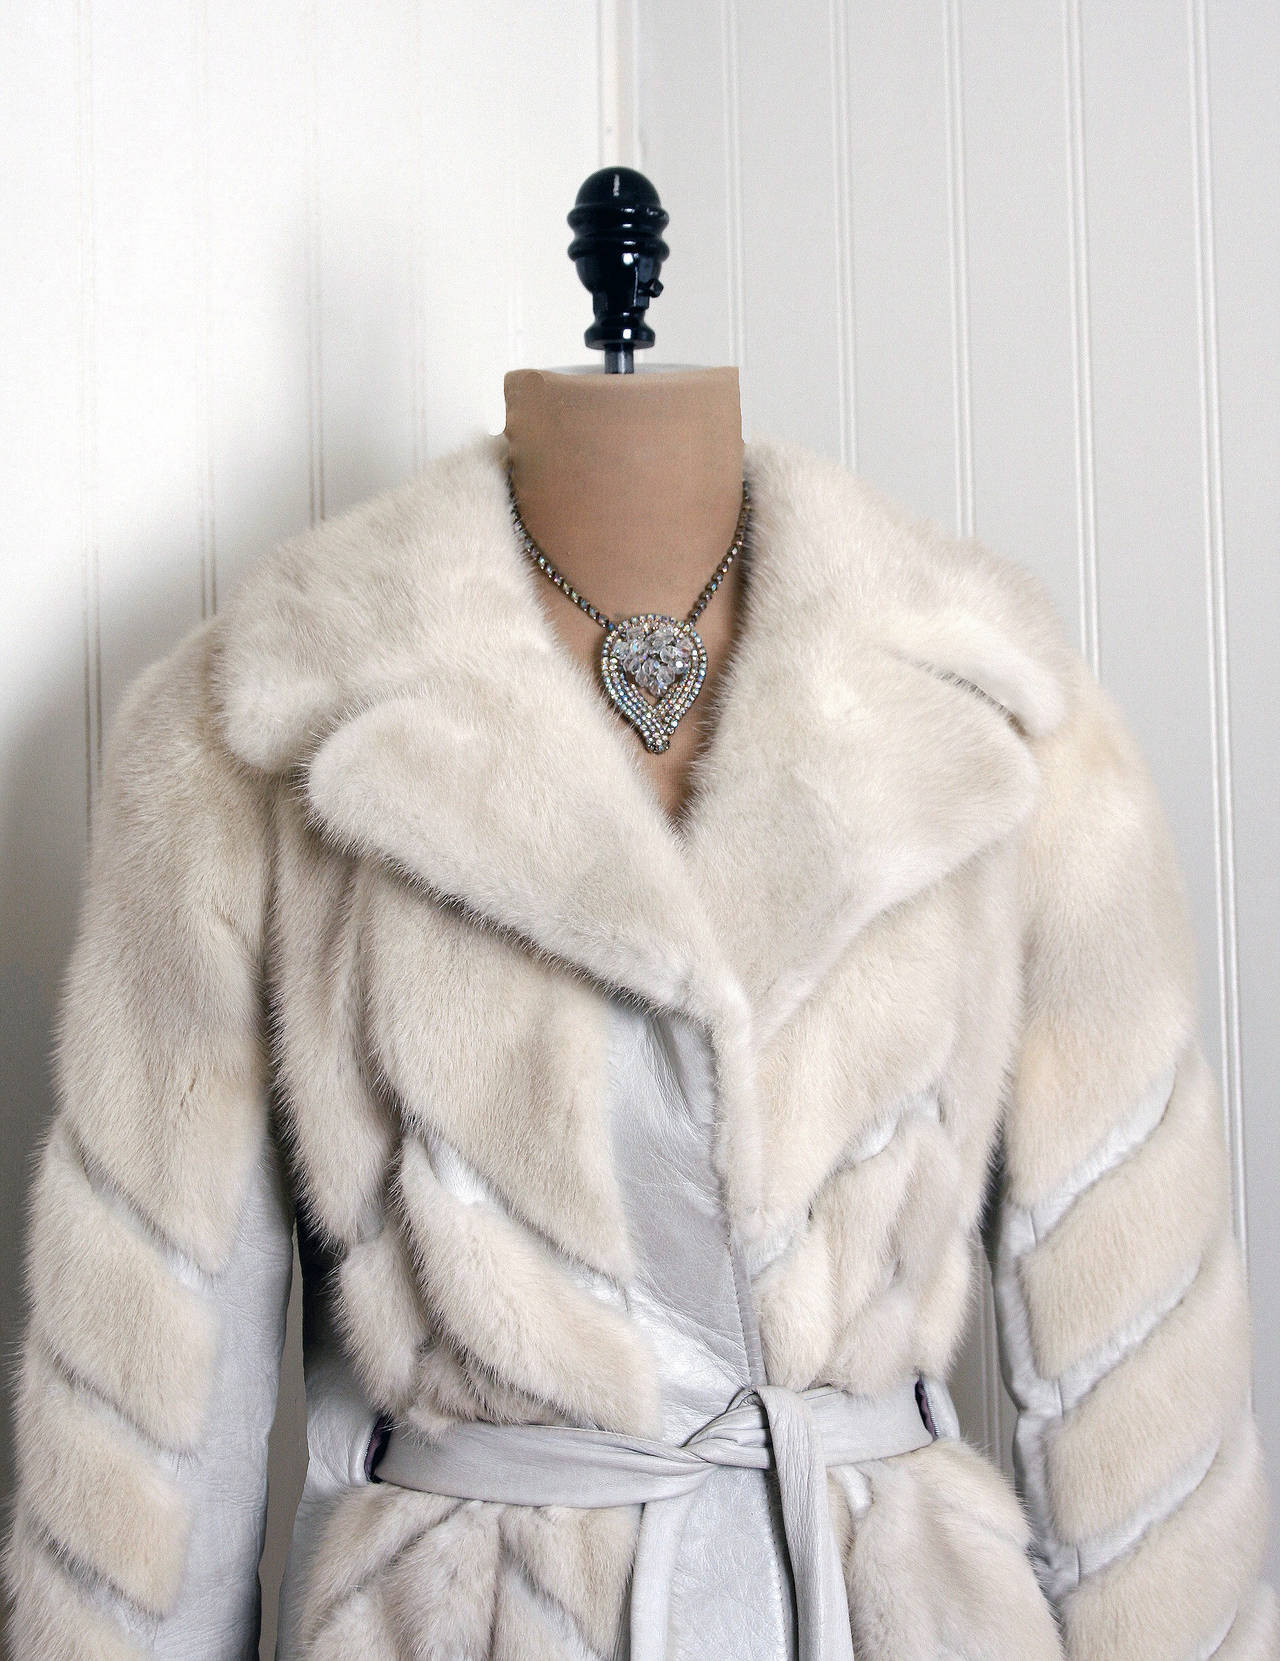 This exquisite 1960's genuine mink-fur and leather coat will make any woman shine during the cold winter months. The soft mink has been worked into an almost deco-stripes chevron pattern and the effect is really breathtaking. The care to piece this